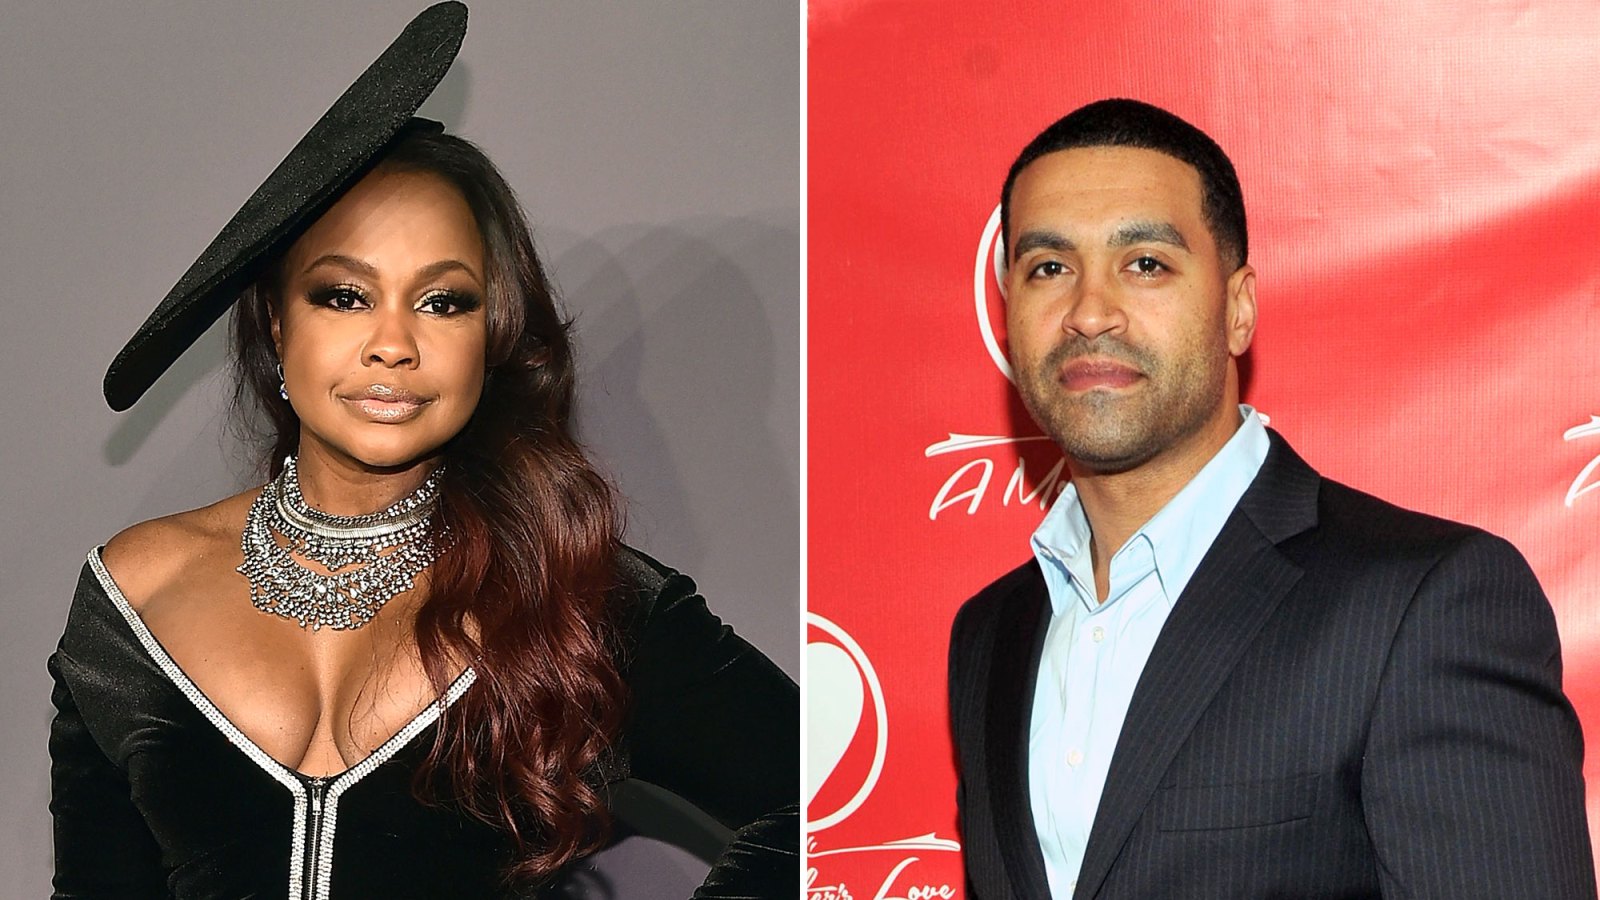 Phaedra Parks’s Ex-Husband Apollo Nida Released From Prison, Moved to Halfway House